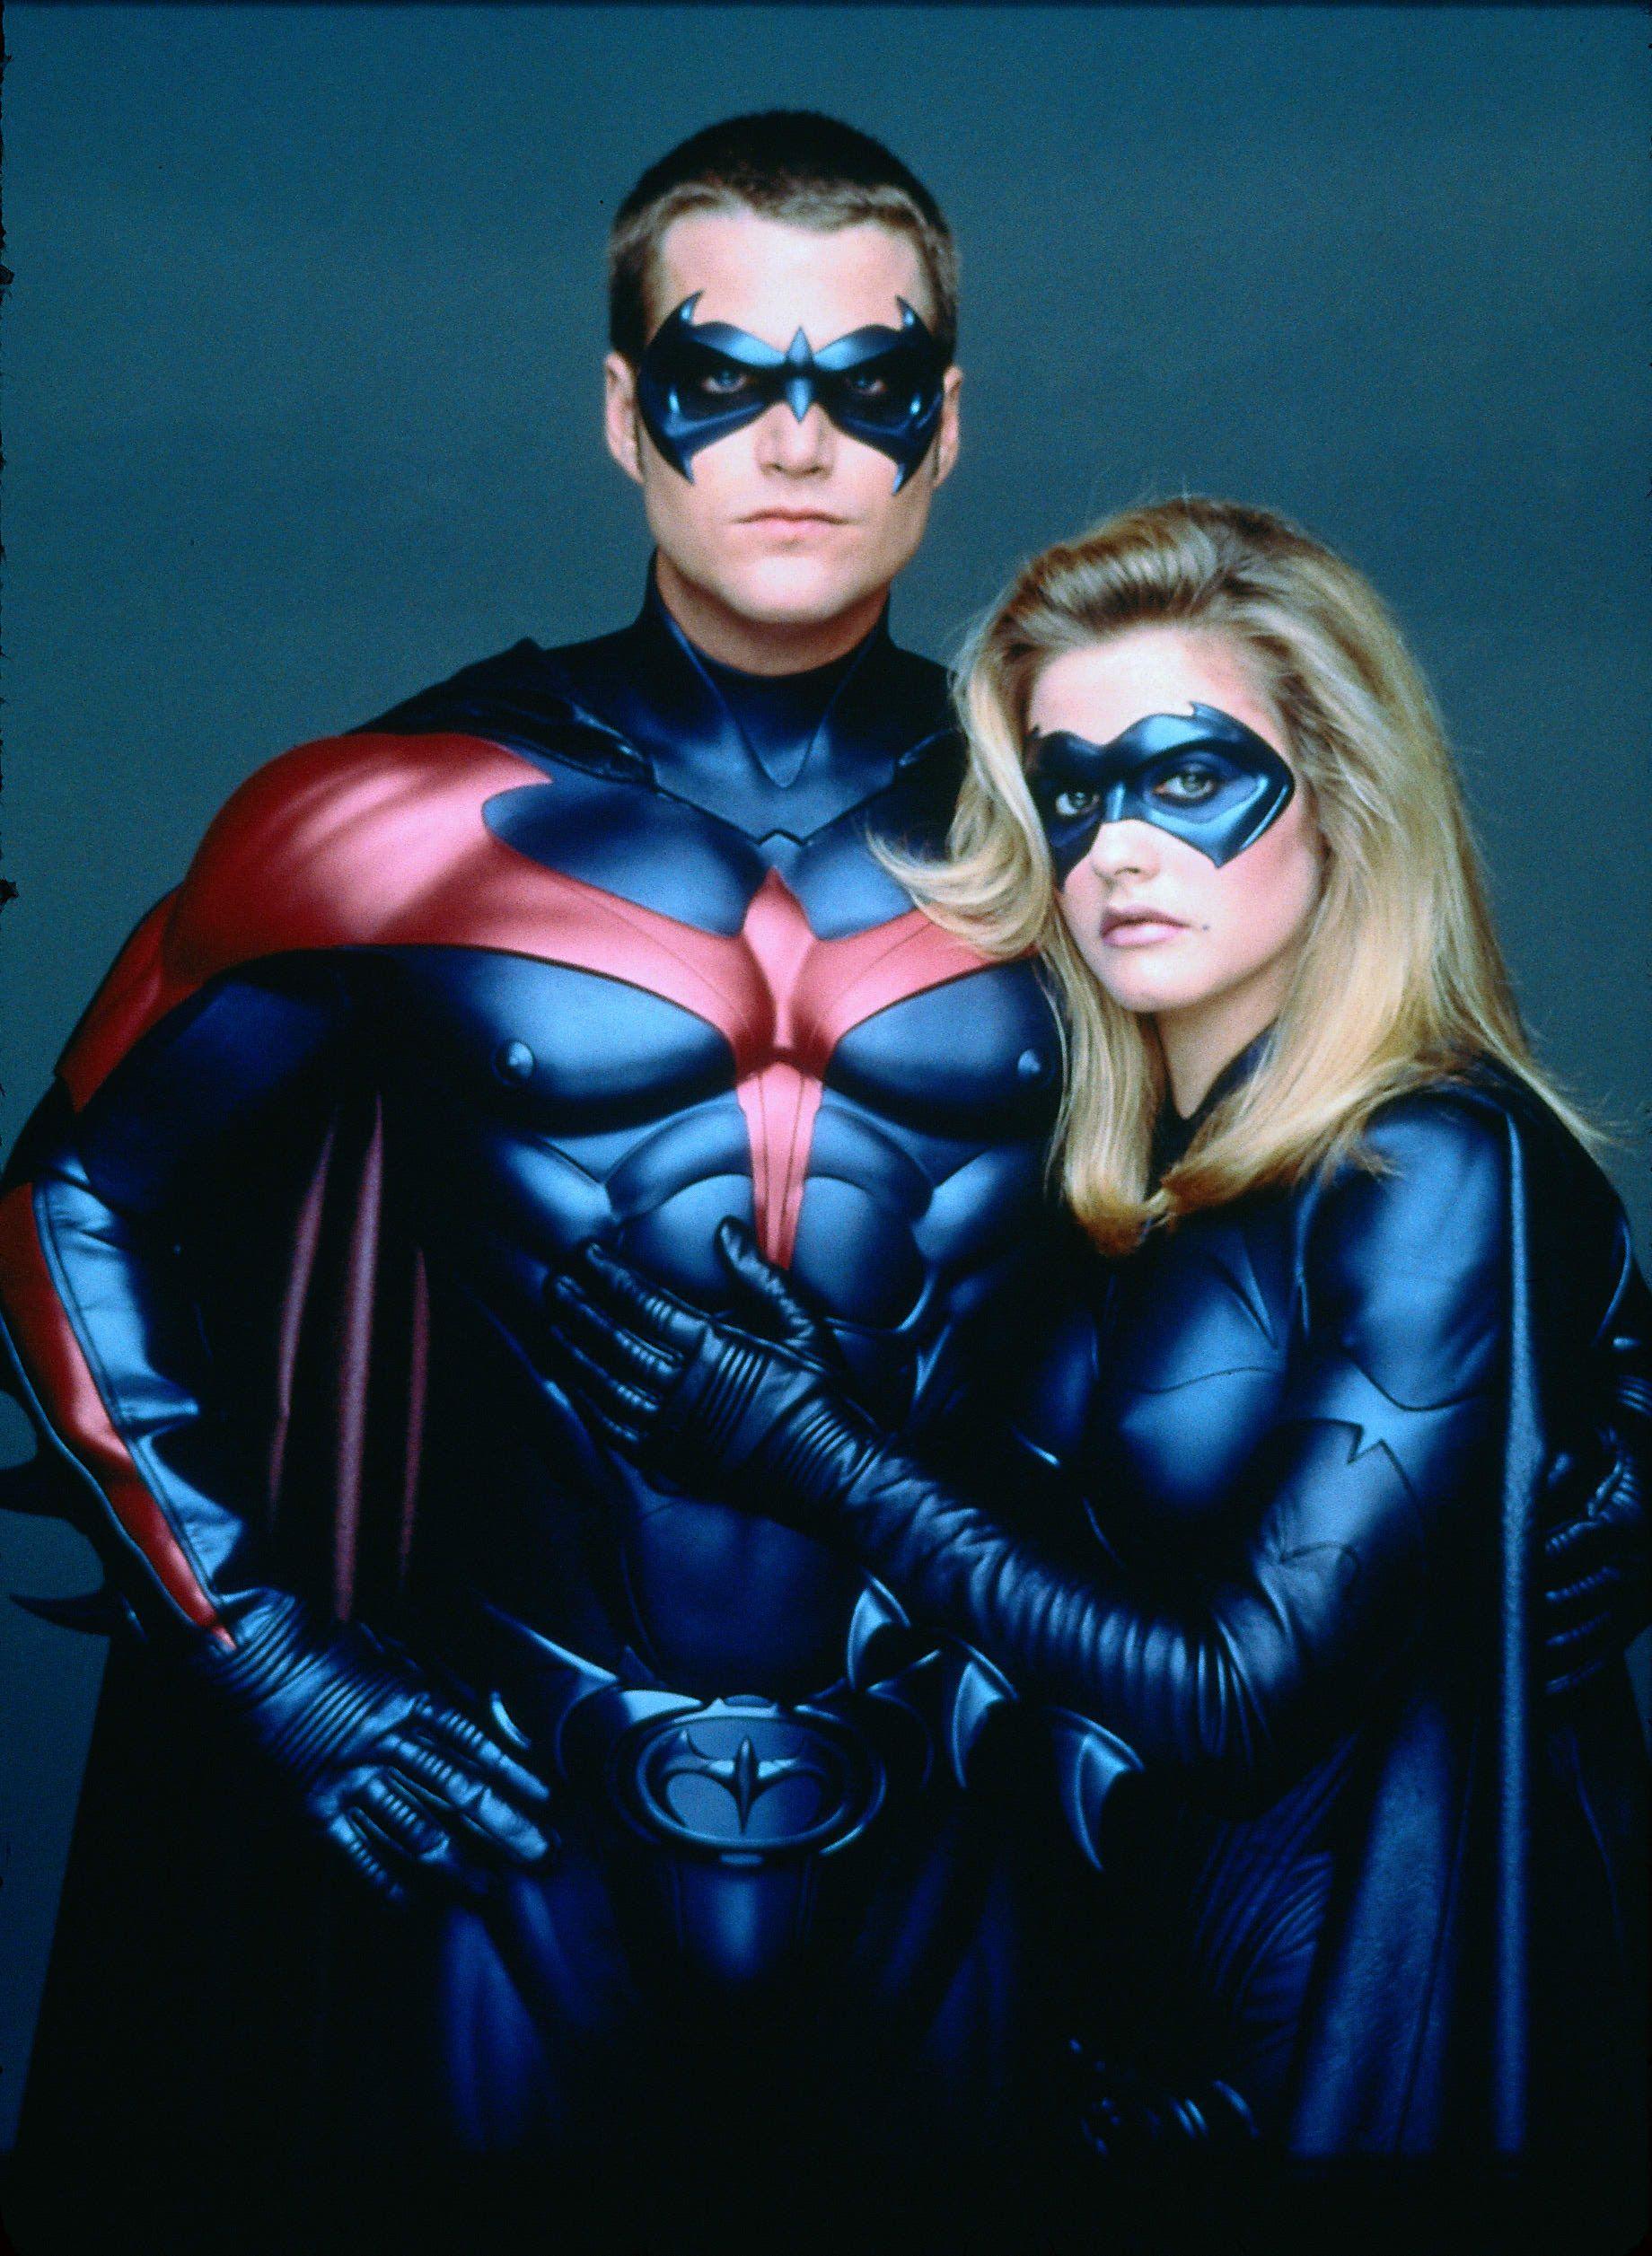 Chris O'Donnell as Robin and Alicia Silverstone as Batgirl. Batman